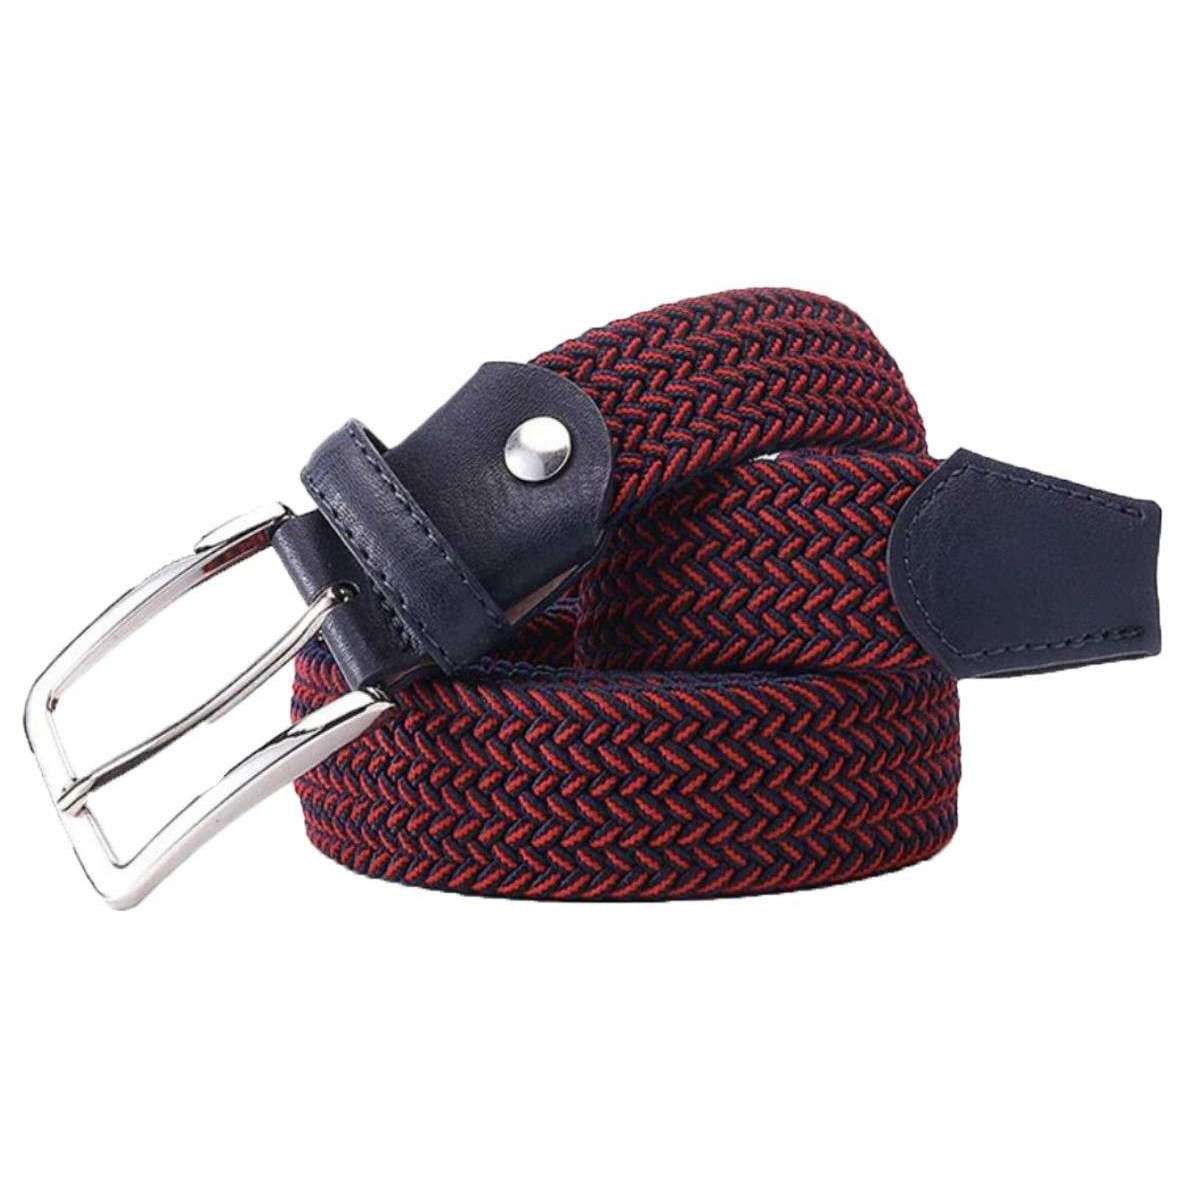 Bassin and Brown Chevron Striped Woven Belt - Wine/Navy